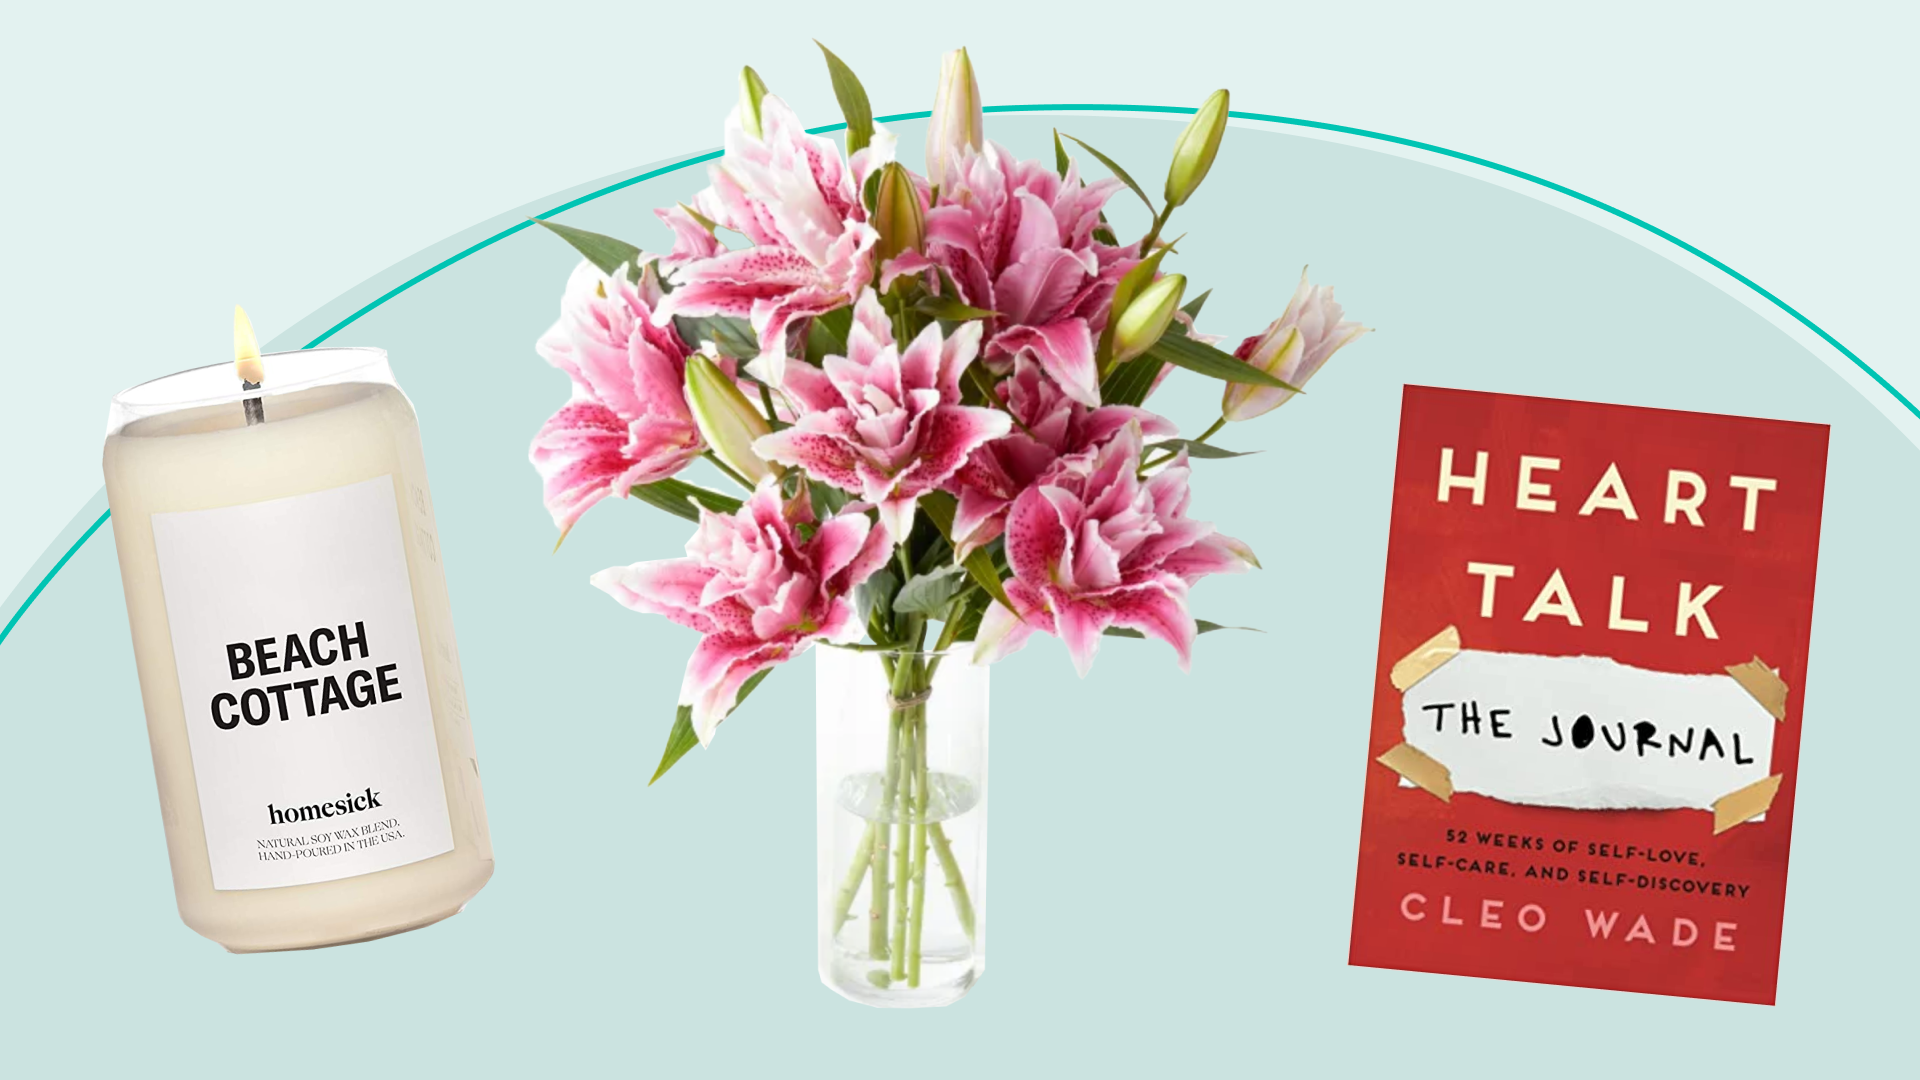 A candle, bouquet of pink flowers, and book on heartbreak 